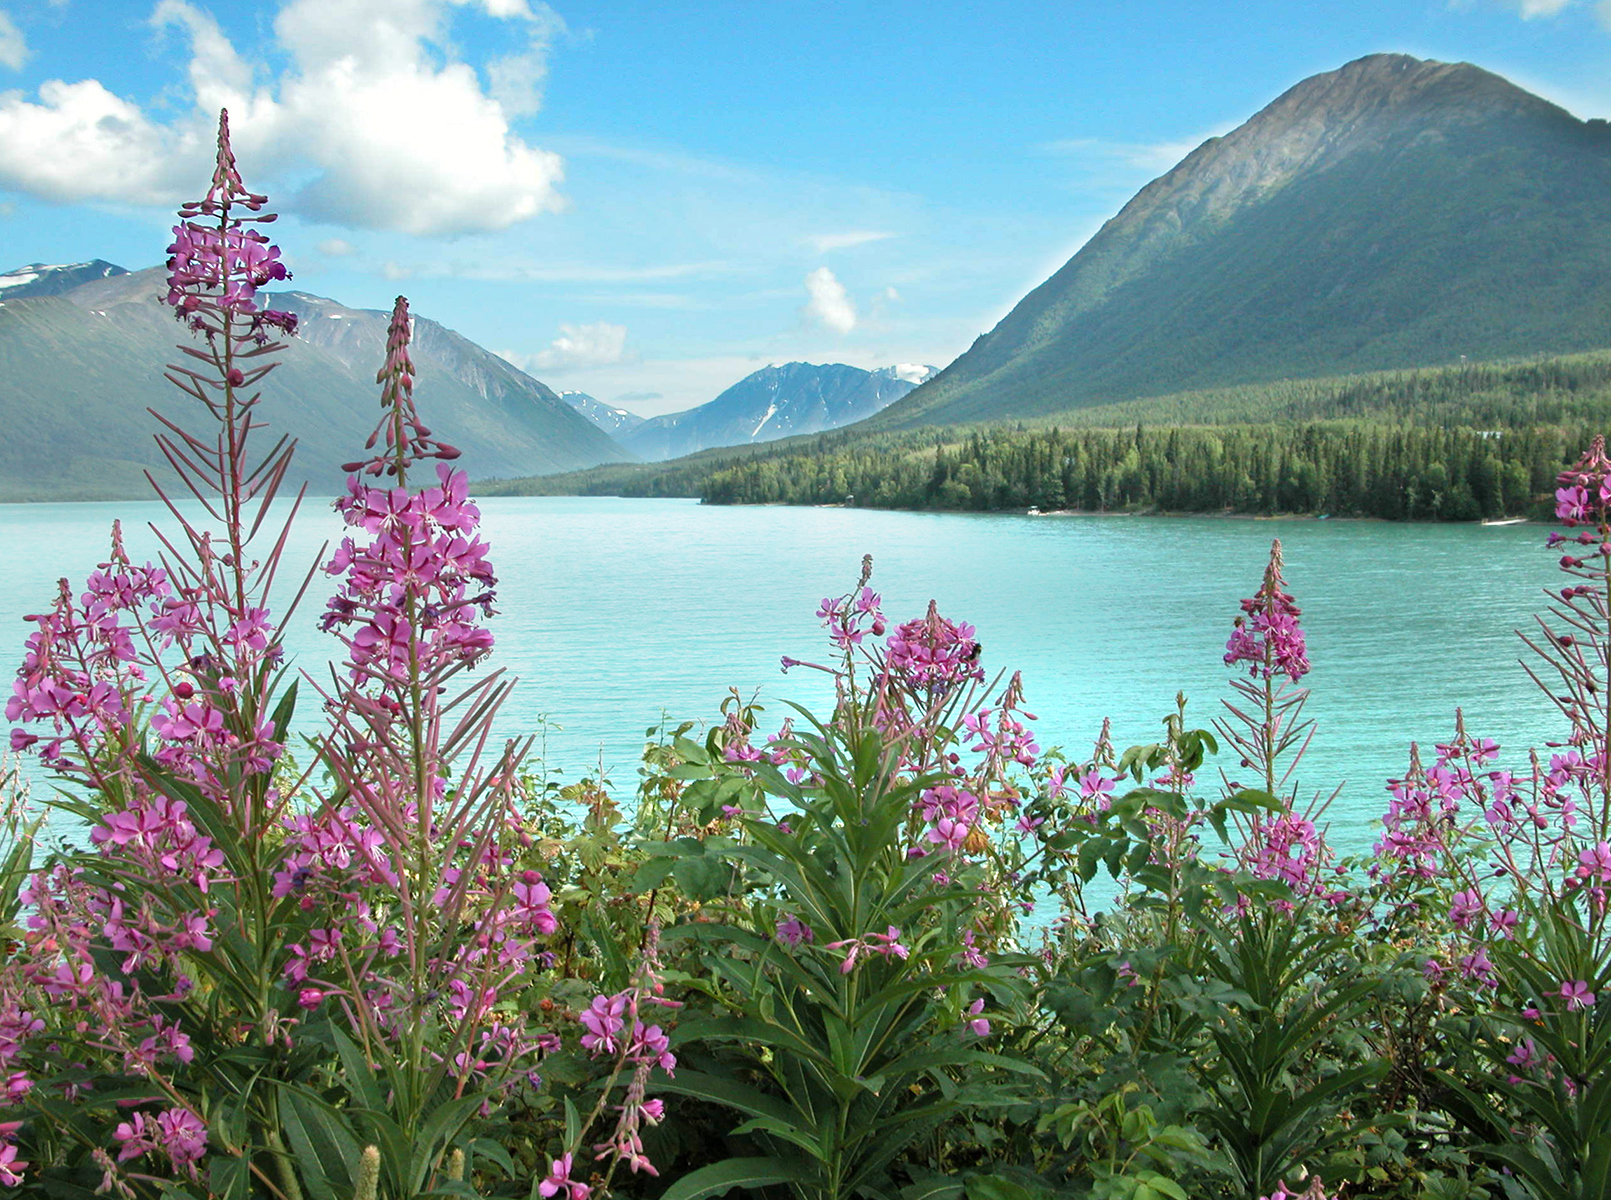 Lake with surrounding mountains and foreground of pink wildflowers